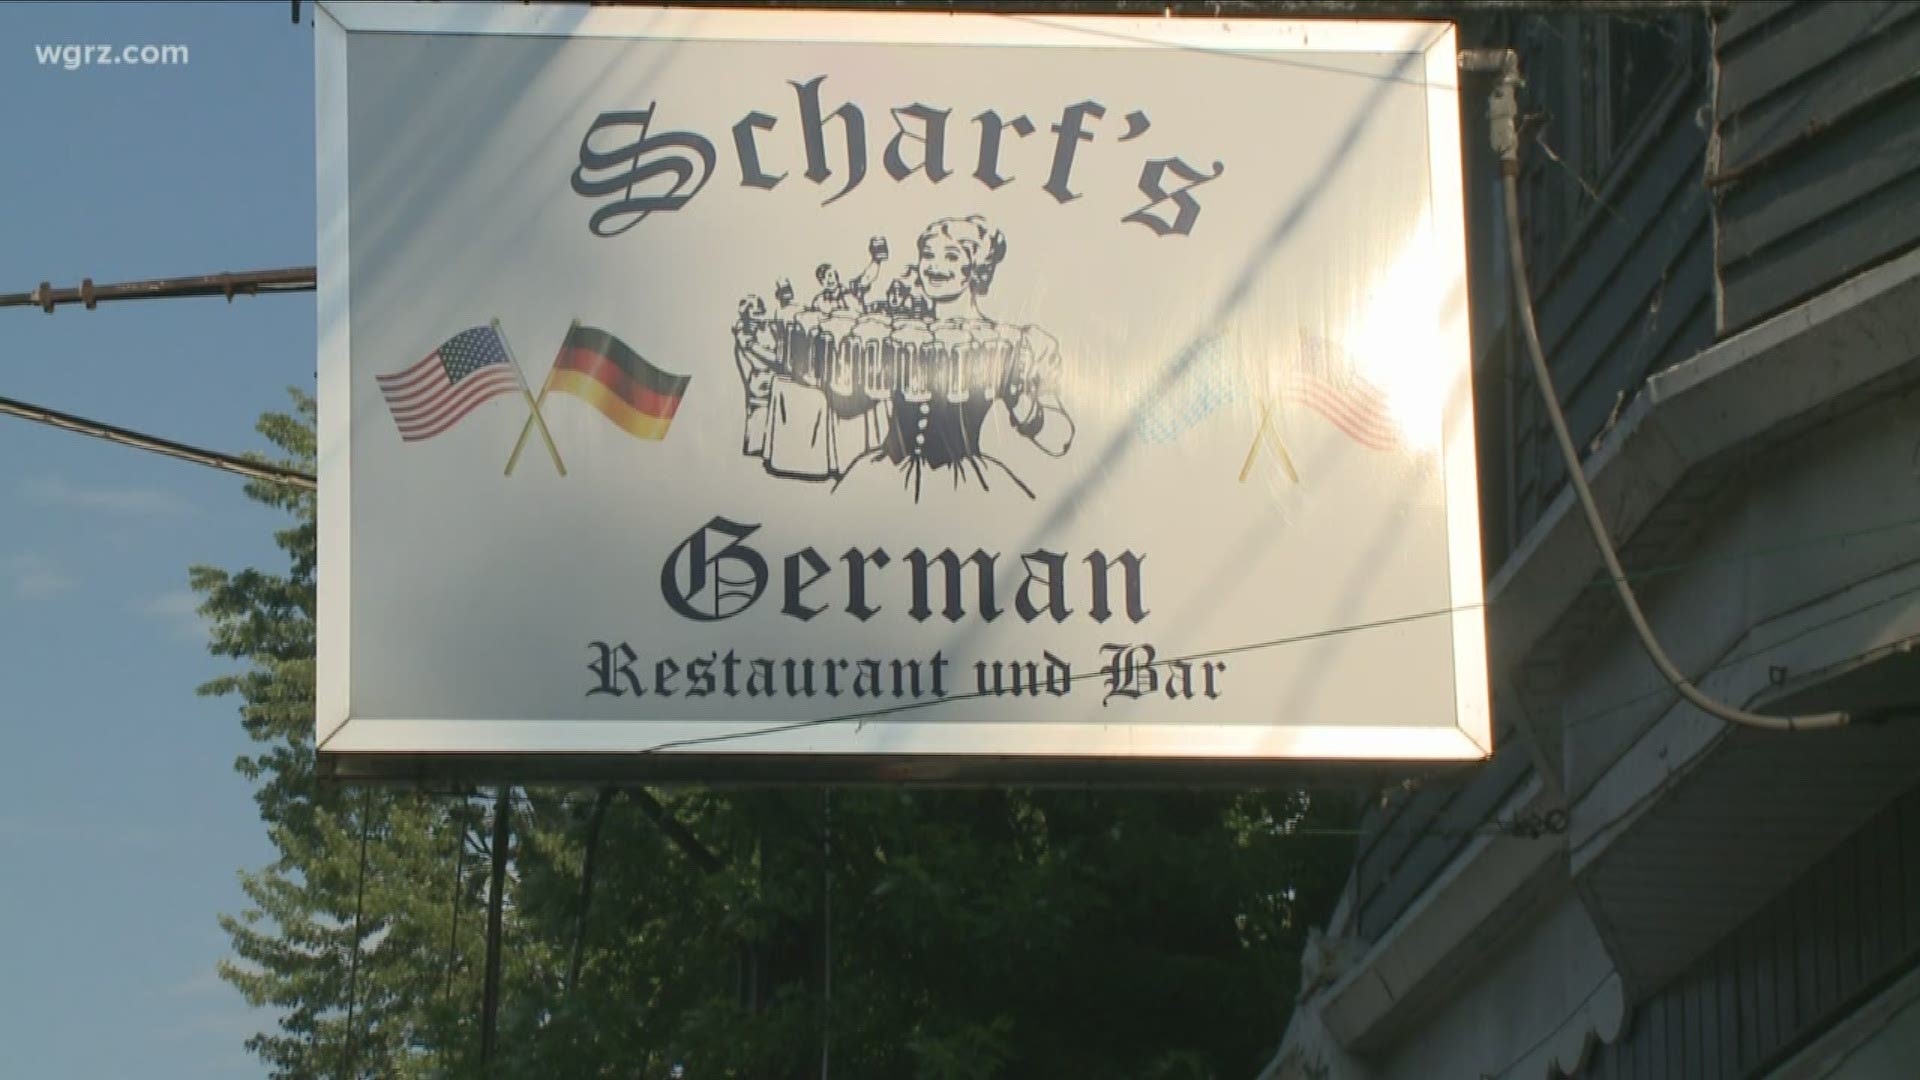 Scharf's first opened in 1967 in Schiller Park before moving to its location on Clinton Street.